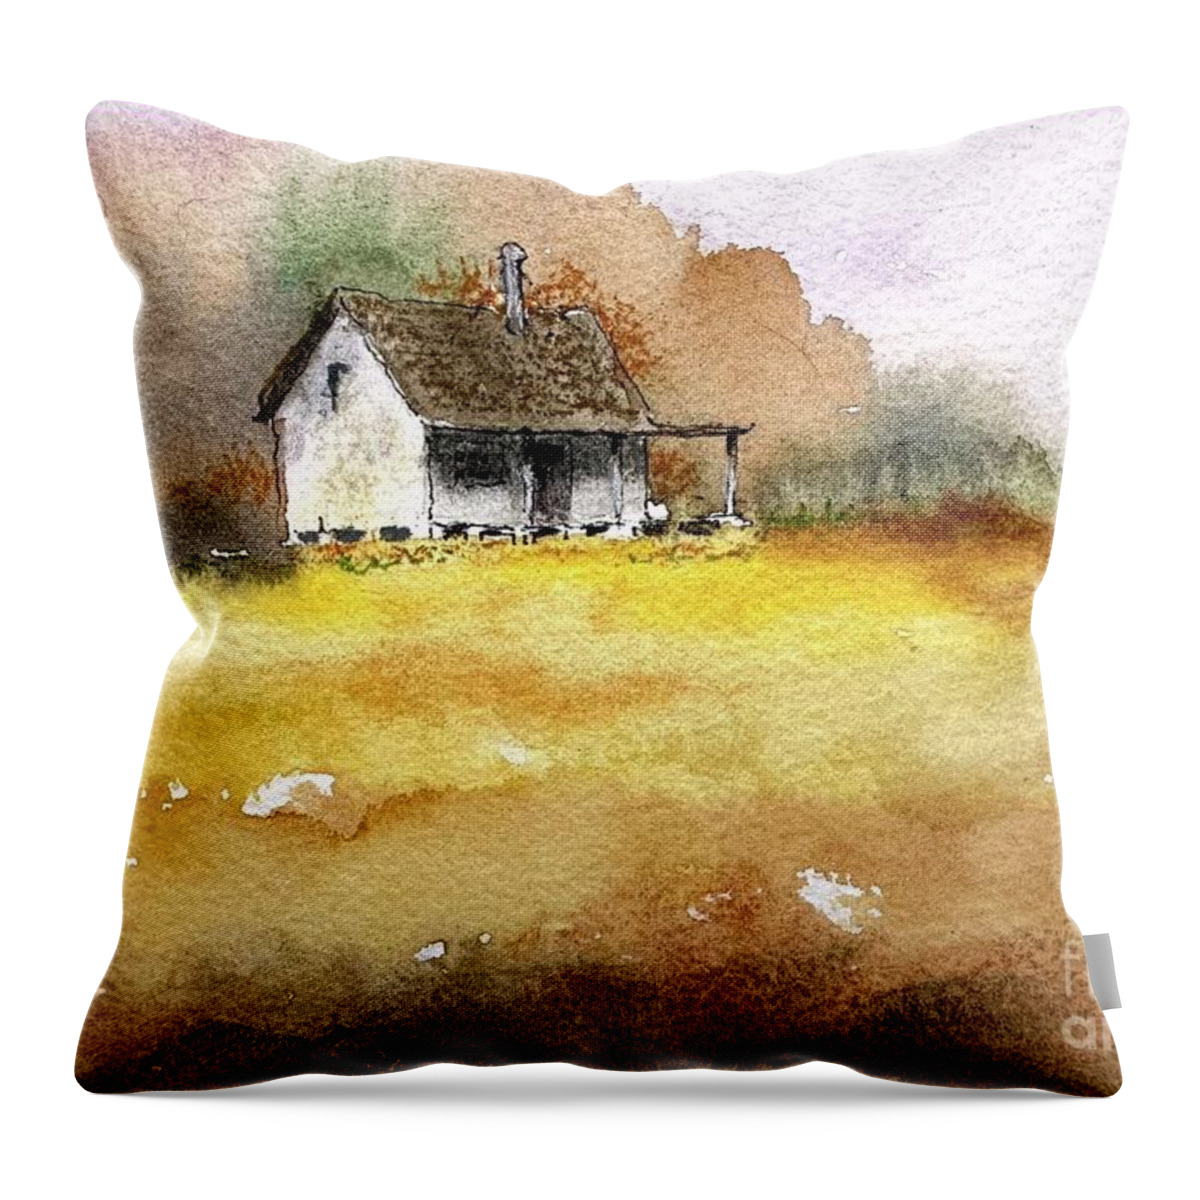 Watercolor Throw Pillow featuring the painting Home Place by William Renzulli